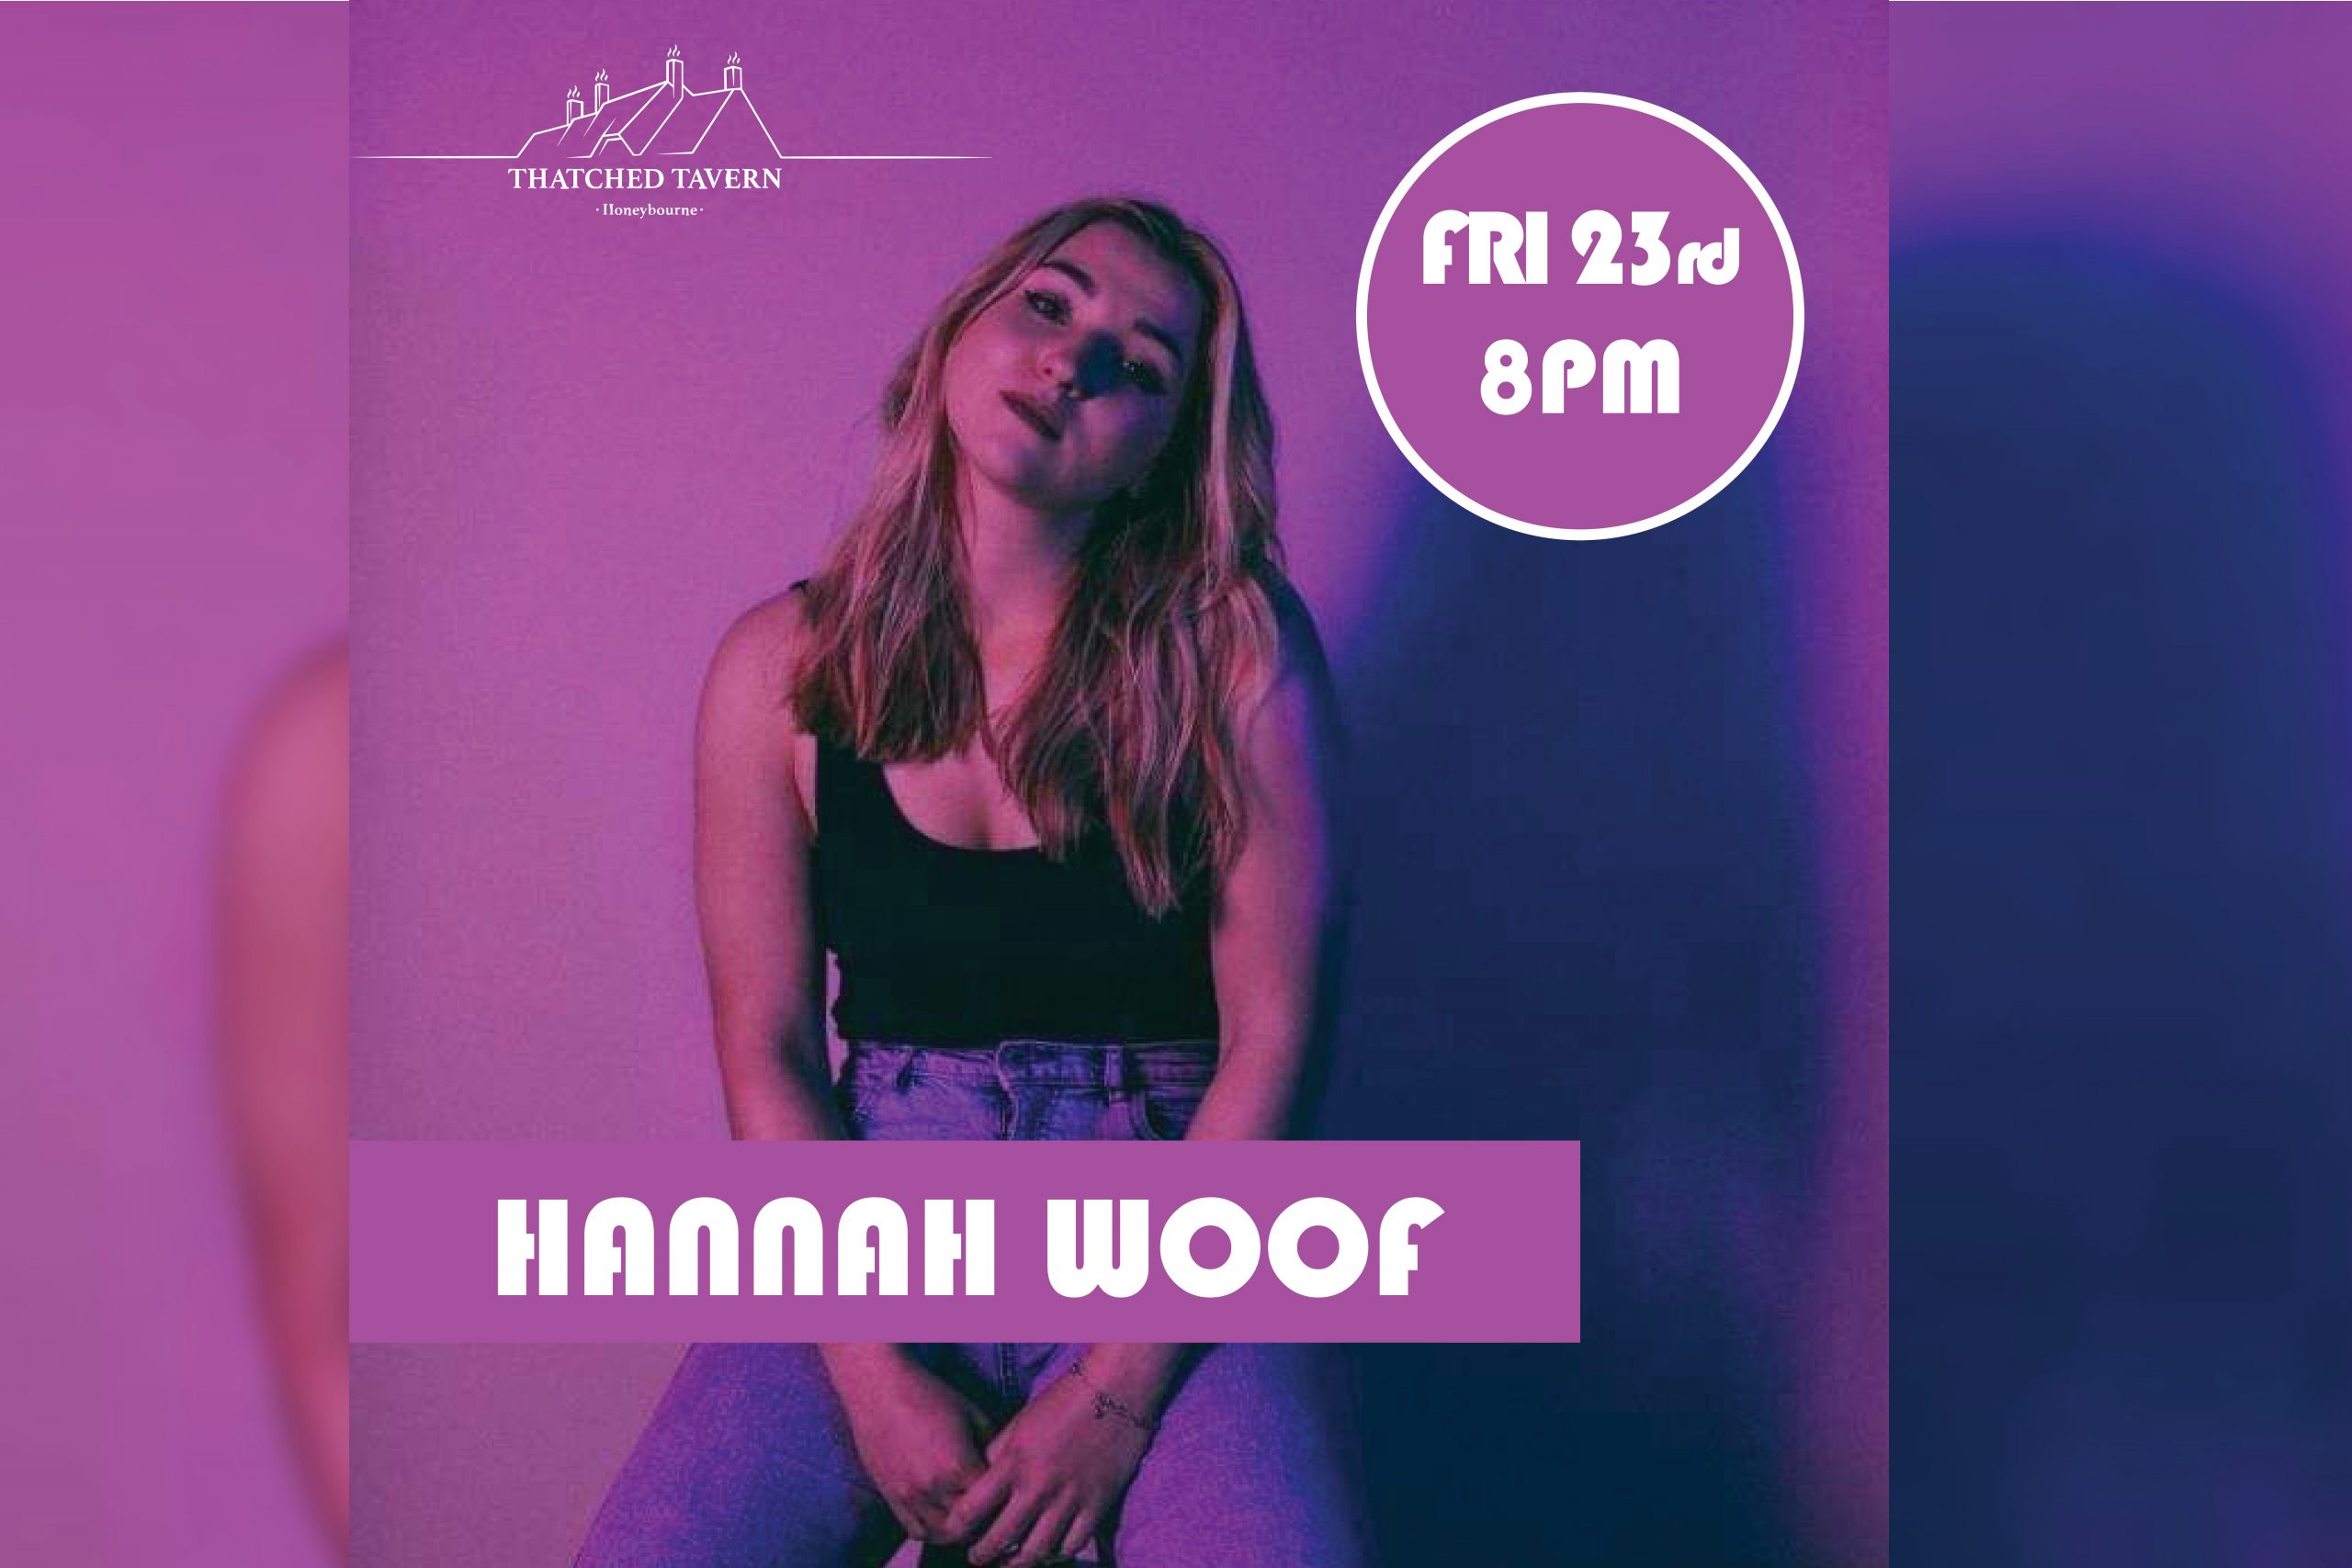 Live music performed by the amazing Hannah Woof at The Thatched Tavern Pub in Honeybourne - Friday 23rd June from 8.00pm. Come and joins us for an amazing night of entertainment and warm vibes.